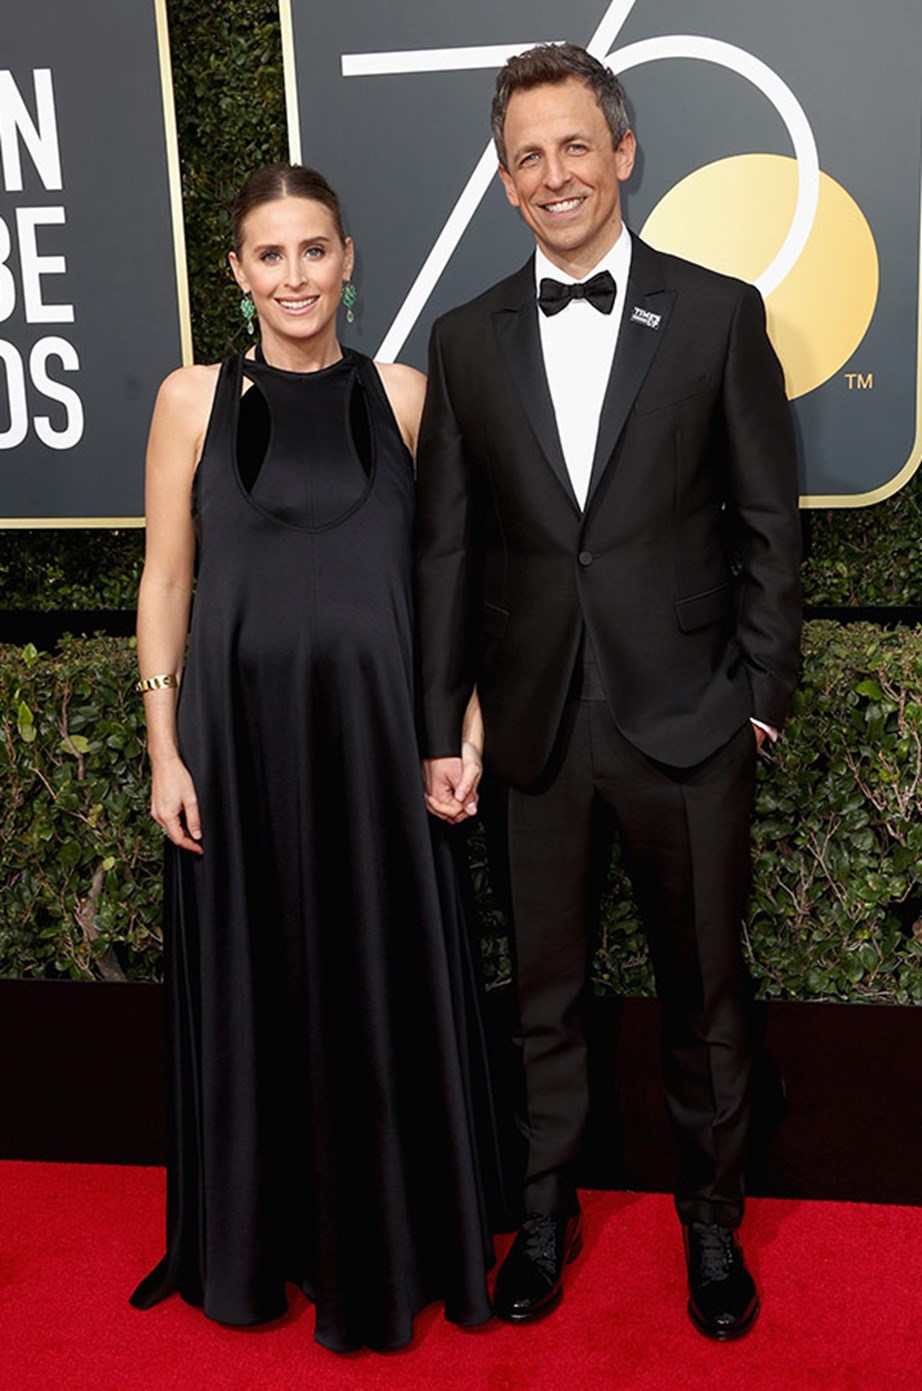 Not long to go now! Host Seth Meyers steps out with his wife Alexi Ashe, who is pregnant with their second child.